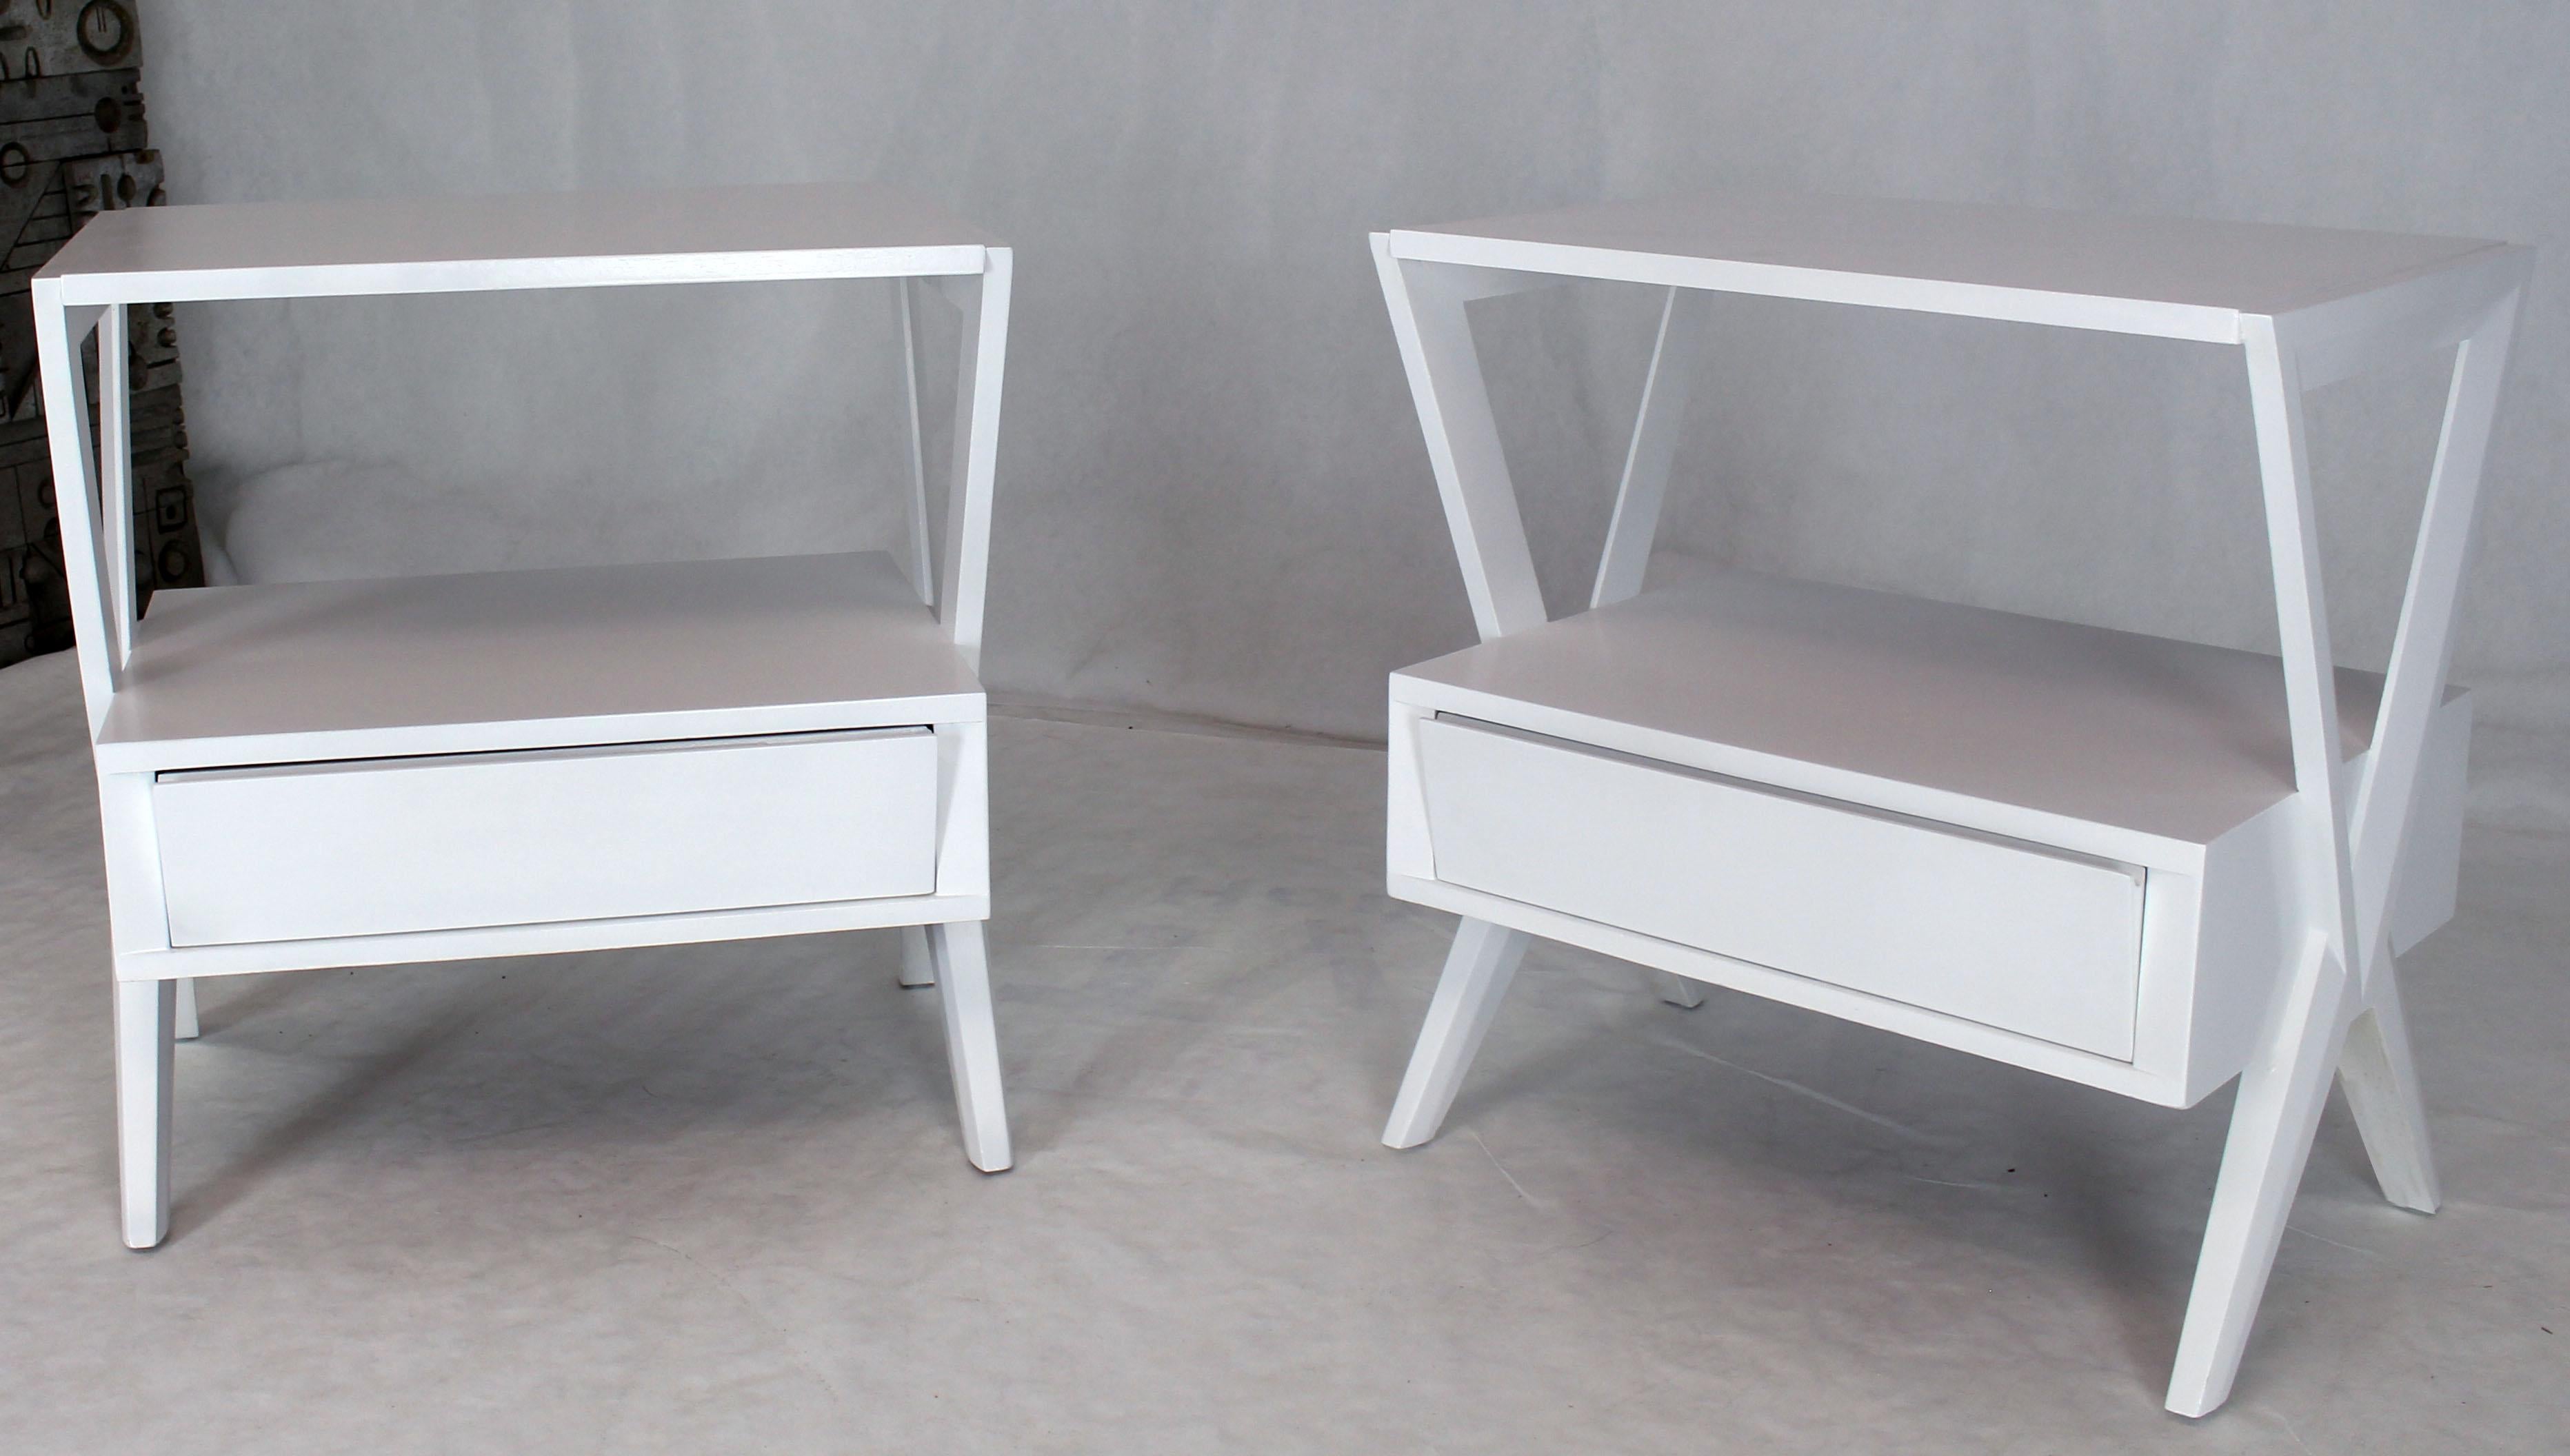 Hardwood Mid-Century Modern White Lacquer One Drawer X-Bases End Tables Nightstands, Pair For Sale